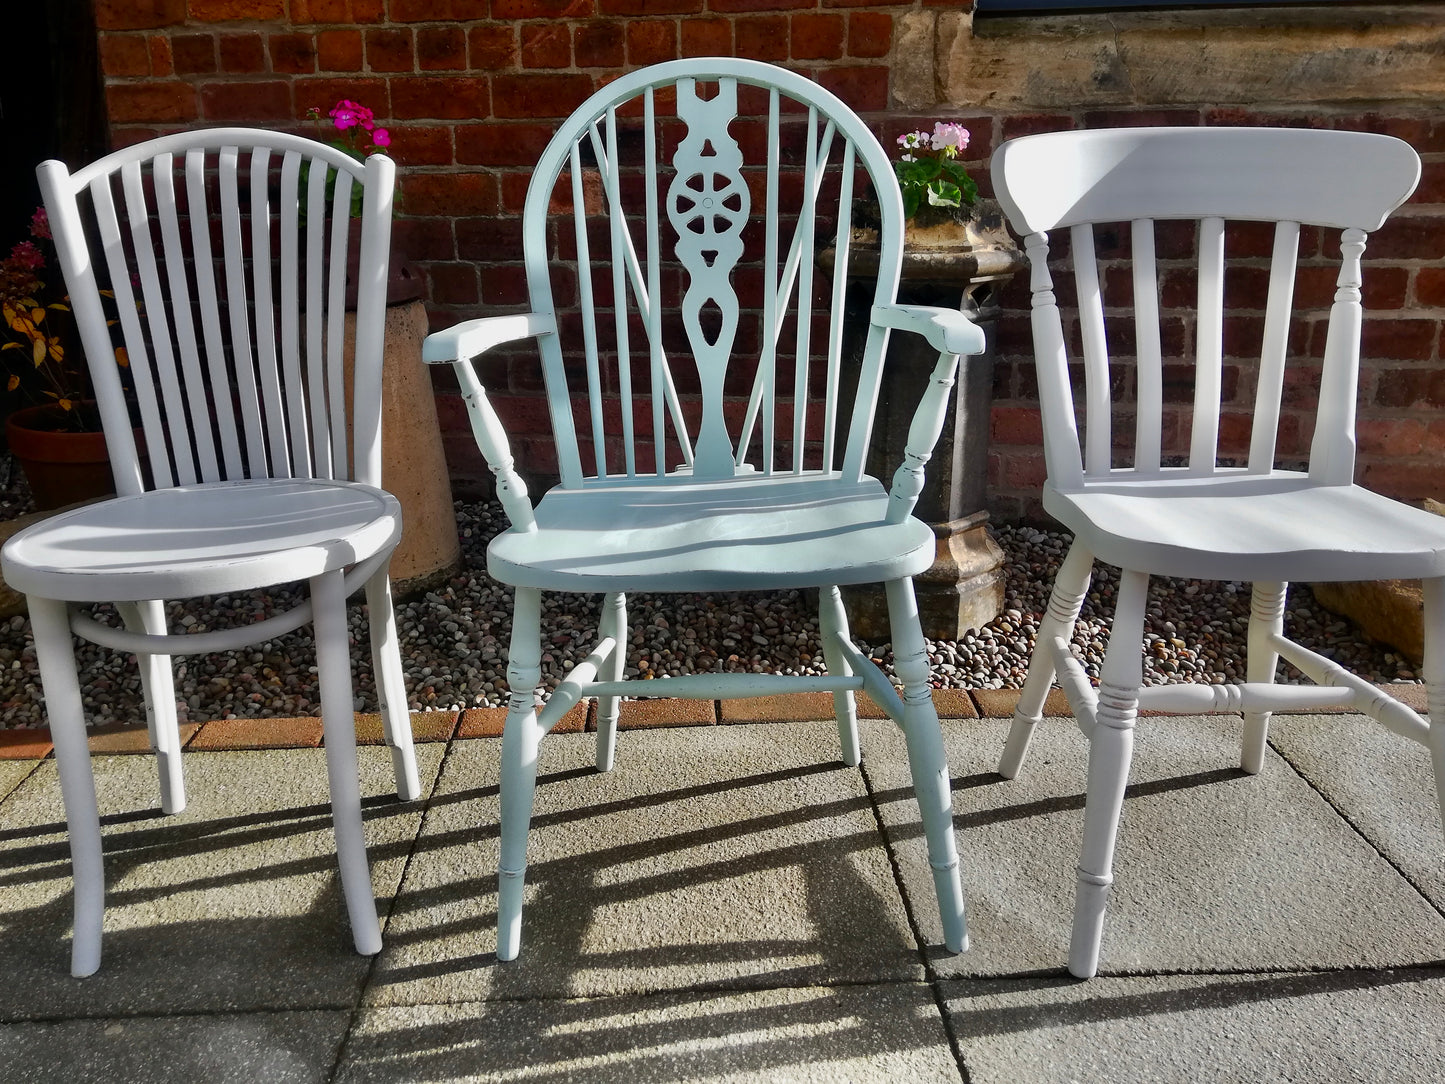 Commission for Niamh 3 mismatched vintage dining chairs